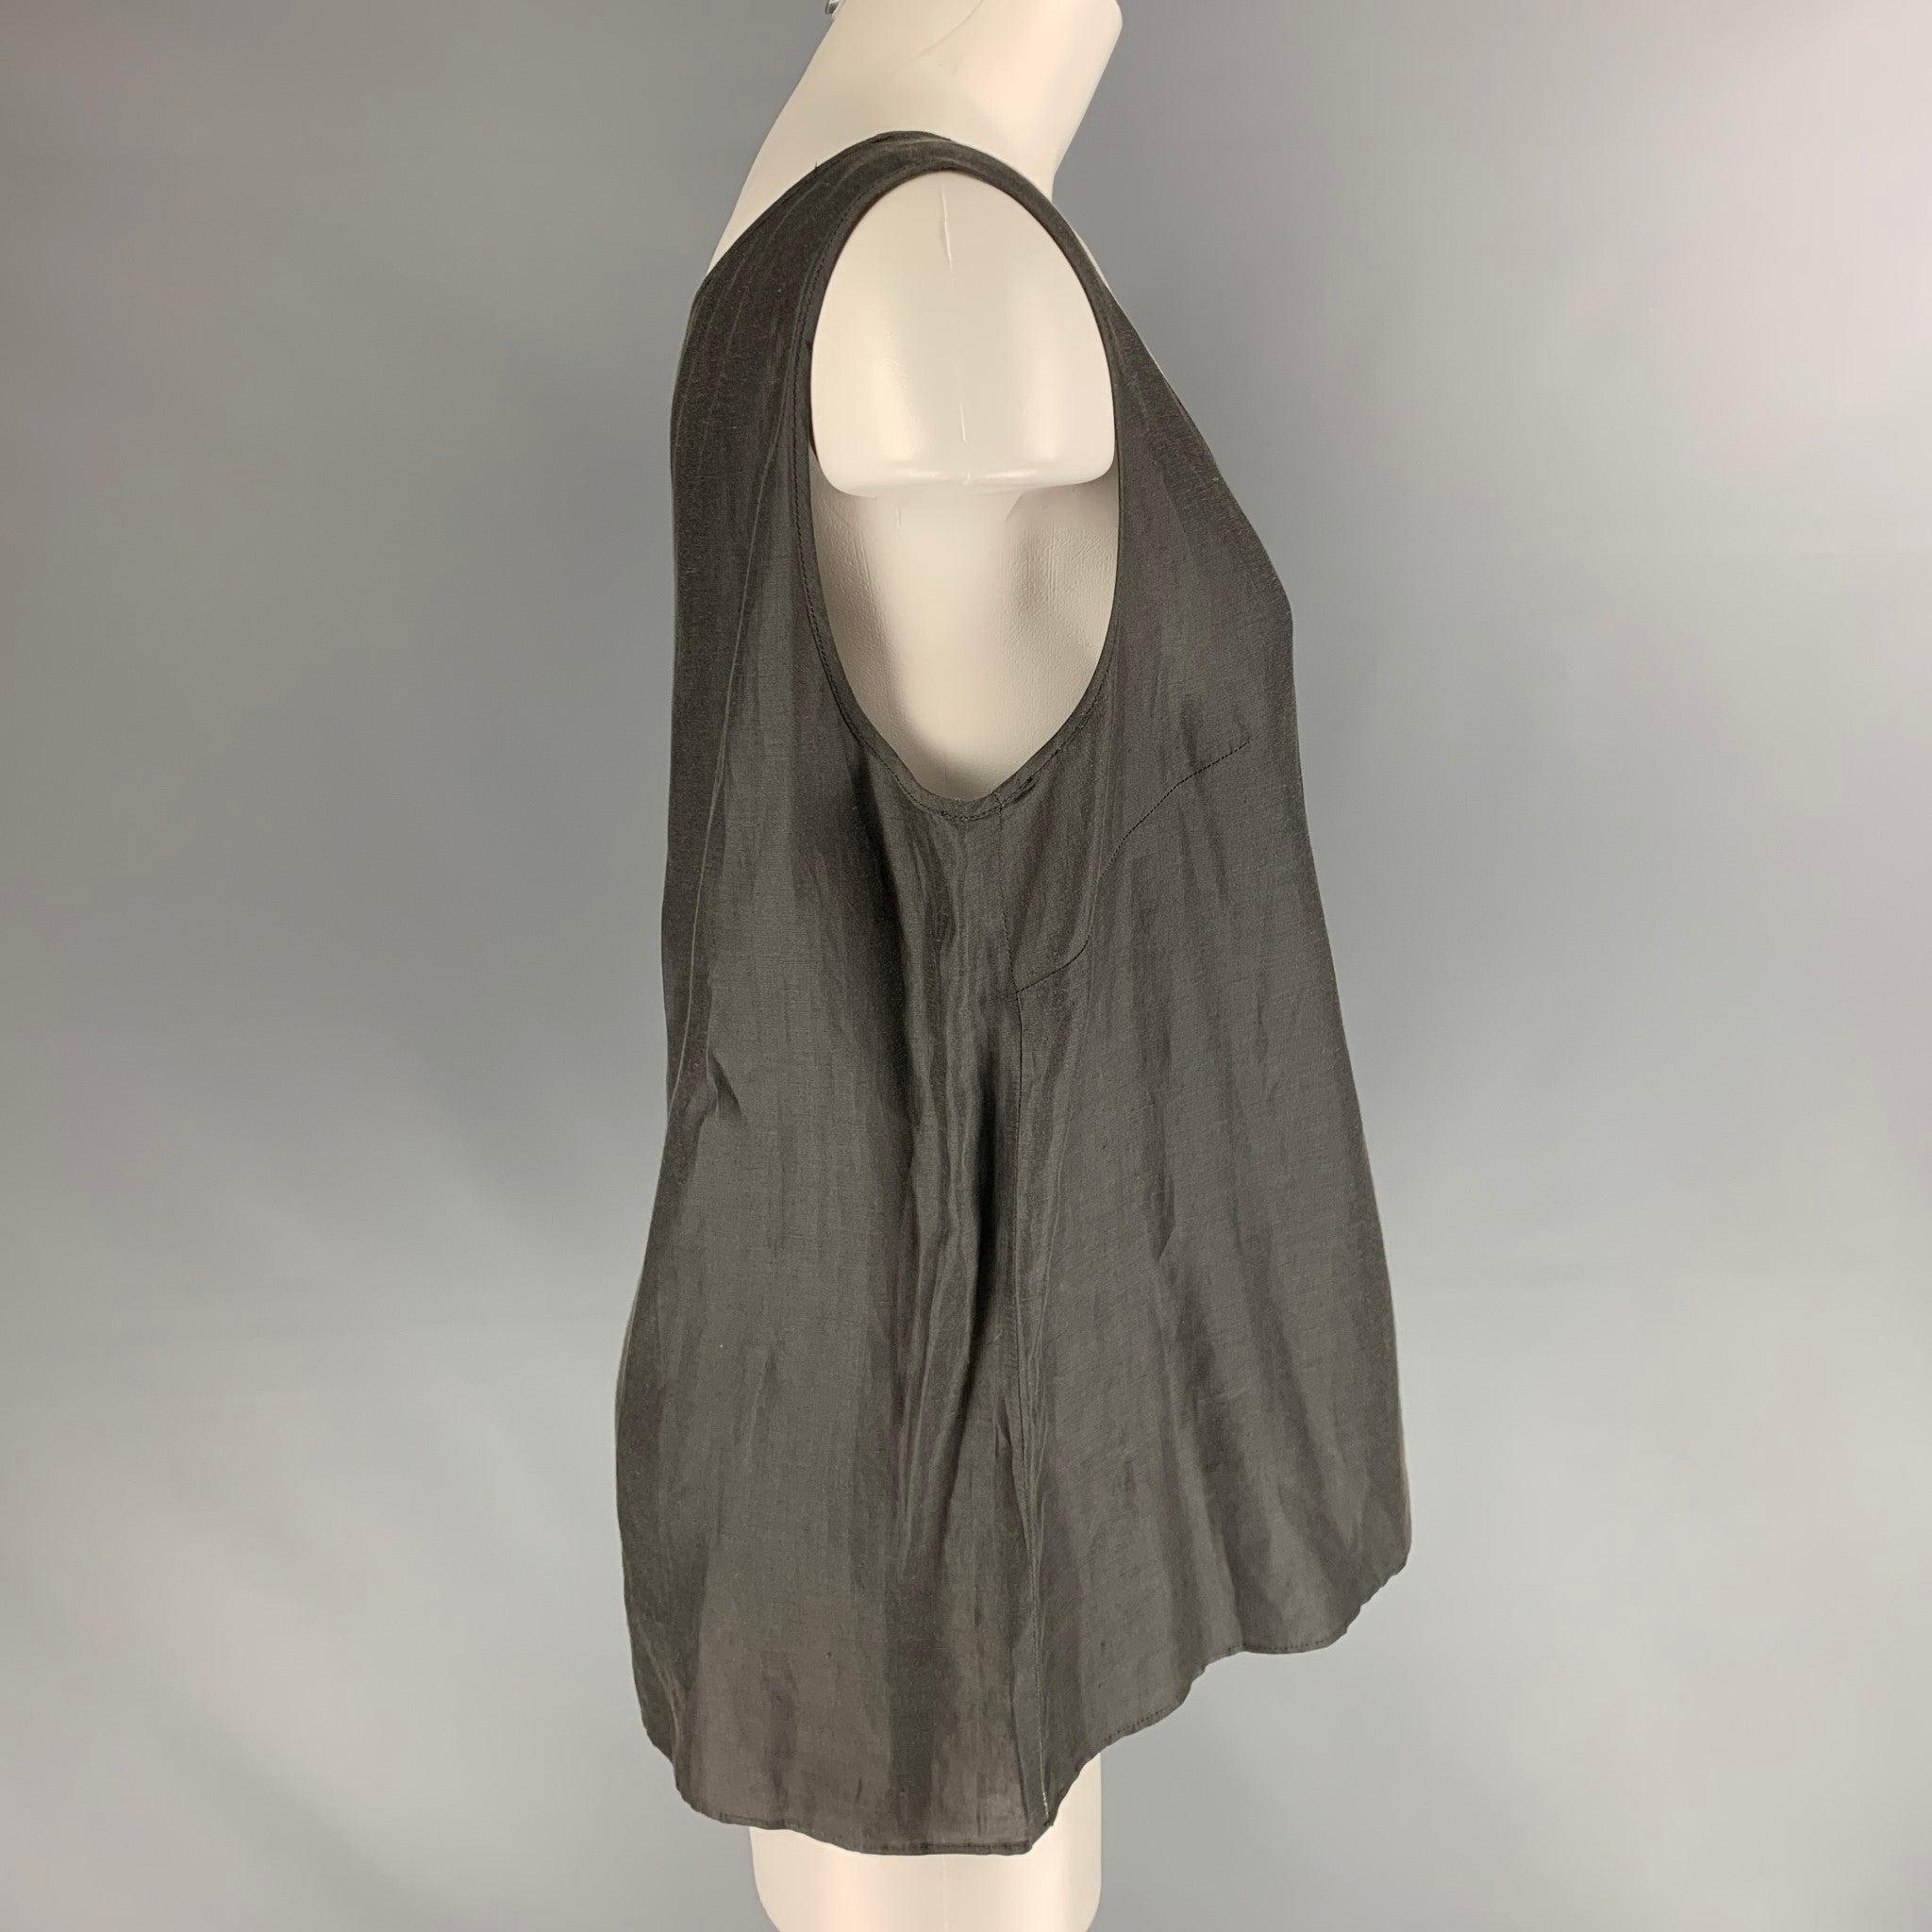 GIORGIO ARMANI sleeveless blouse comes in a slate linen and silk featuring a round neck. Made in Italy.Excellent Pre-Owned Condition. 
 

 Marked:  12 
 

 Measurements: 
  
 Shoulder: 15 inches Bust: 43 inches Length: 24 inches  
  
  
  
 Sui